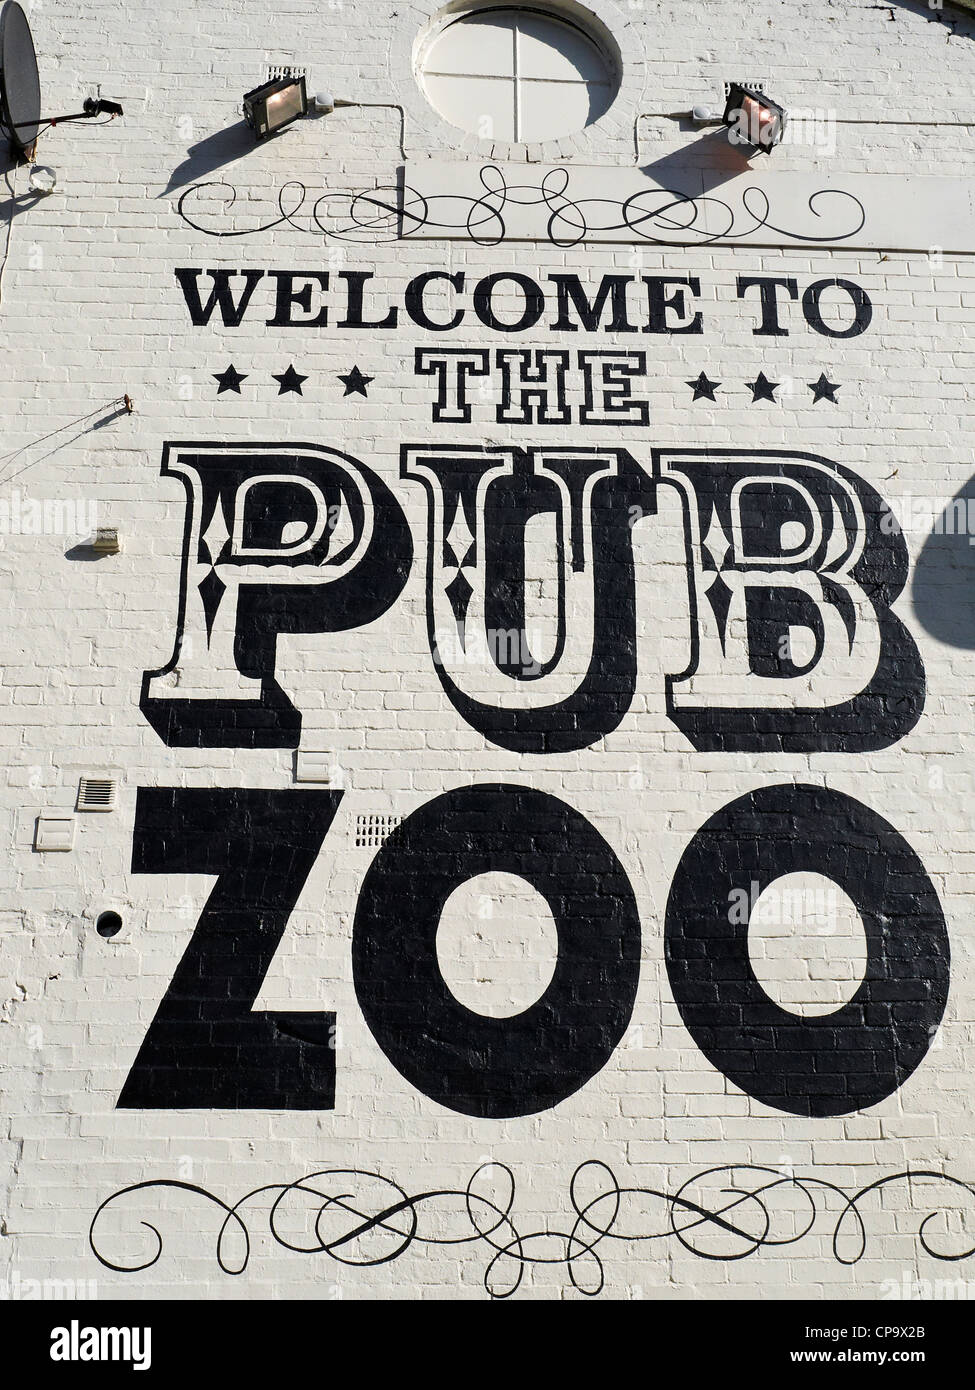 Welcome to the Pub Zoo writing on wall in Manchester UK Stock Photo